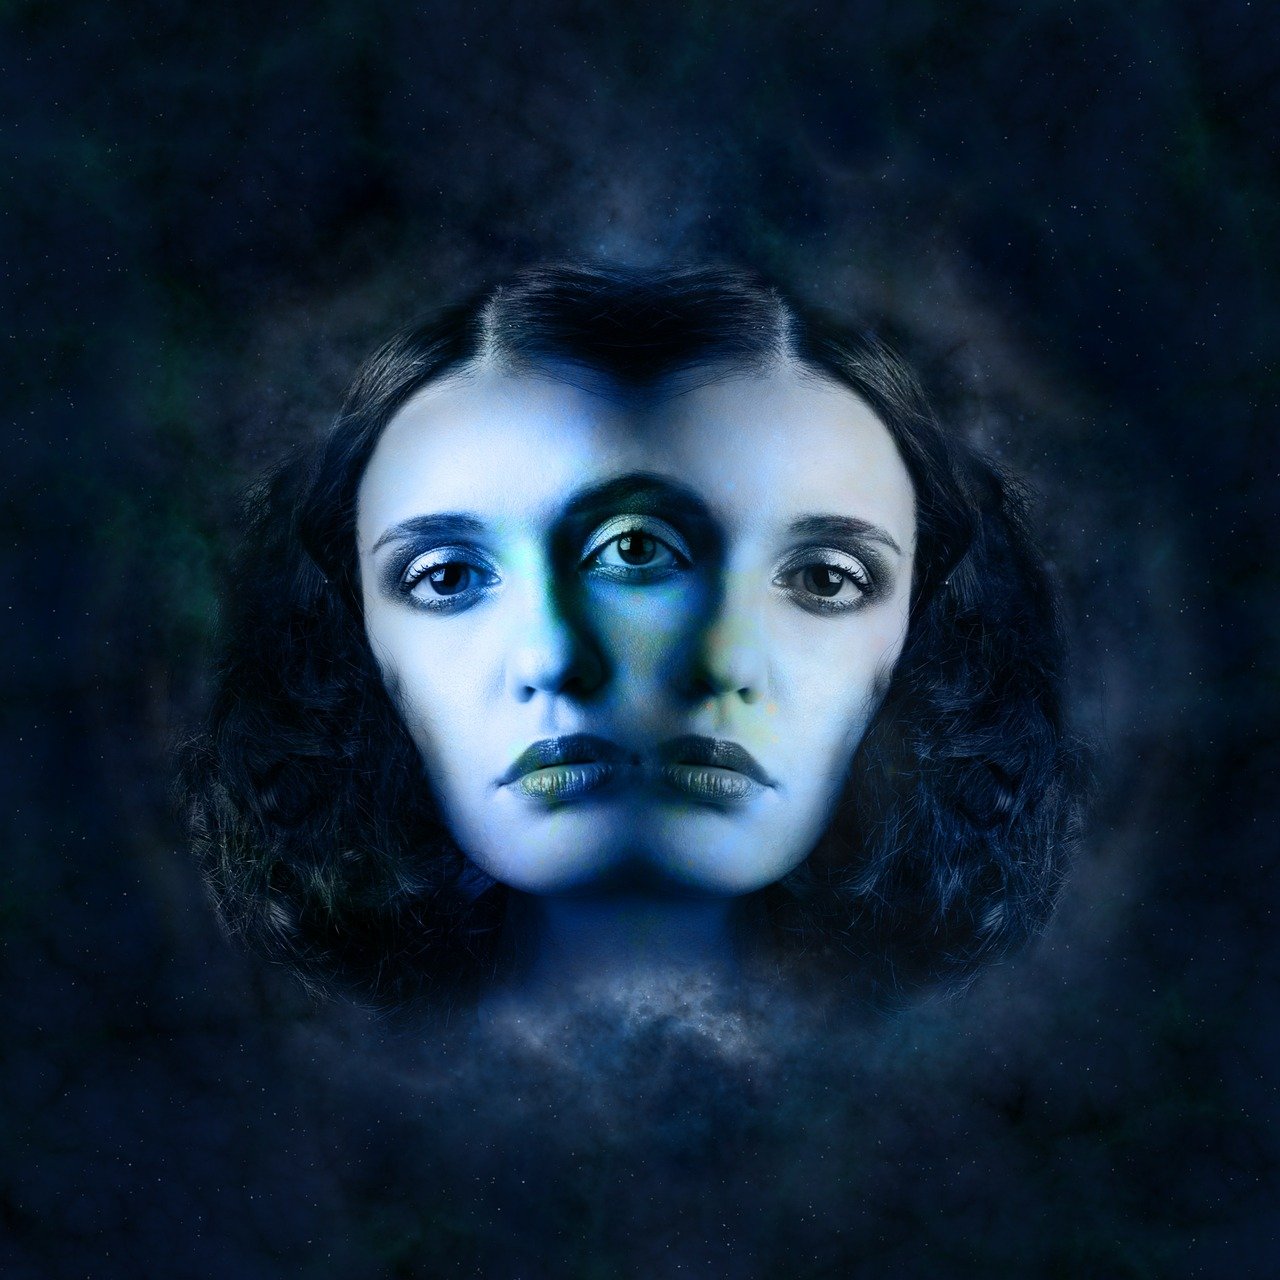 a close up of a woman's face on a dark background, a portrait, inspired by Anna Füssli, shutterstock, surrealism, beautiful gemini twins portrait, emanating with blue aura, symmetrical face illustration, portait photo